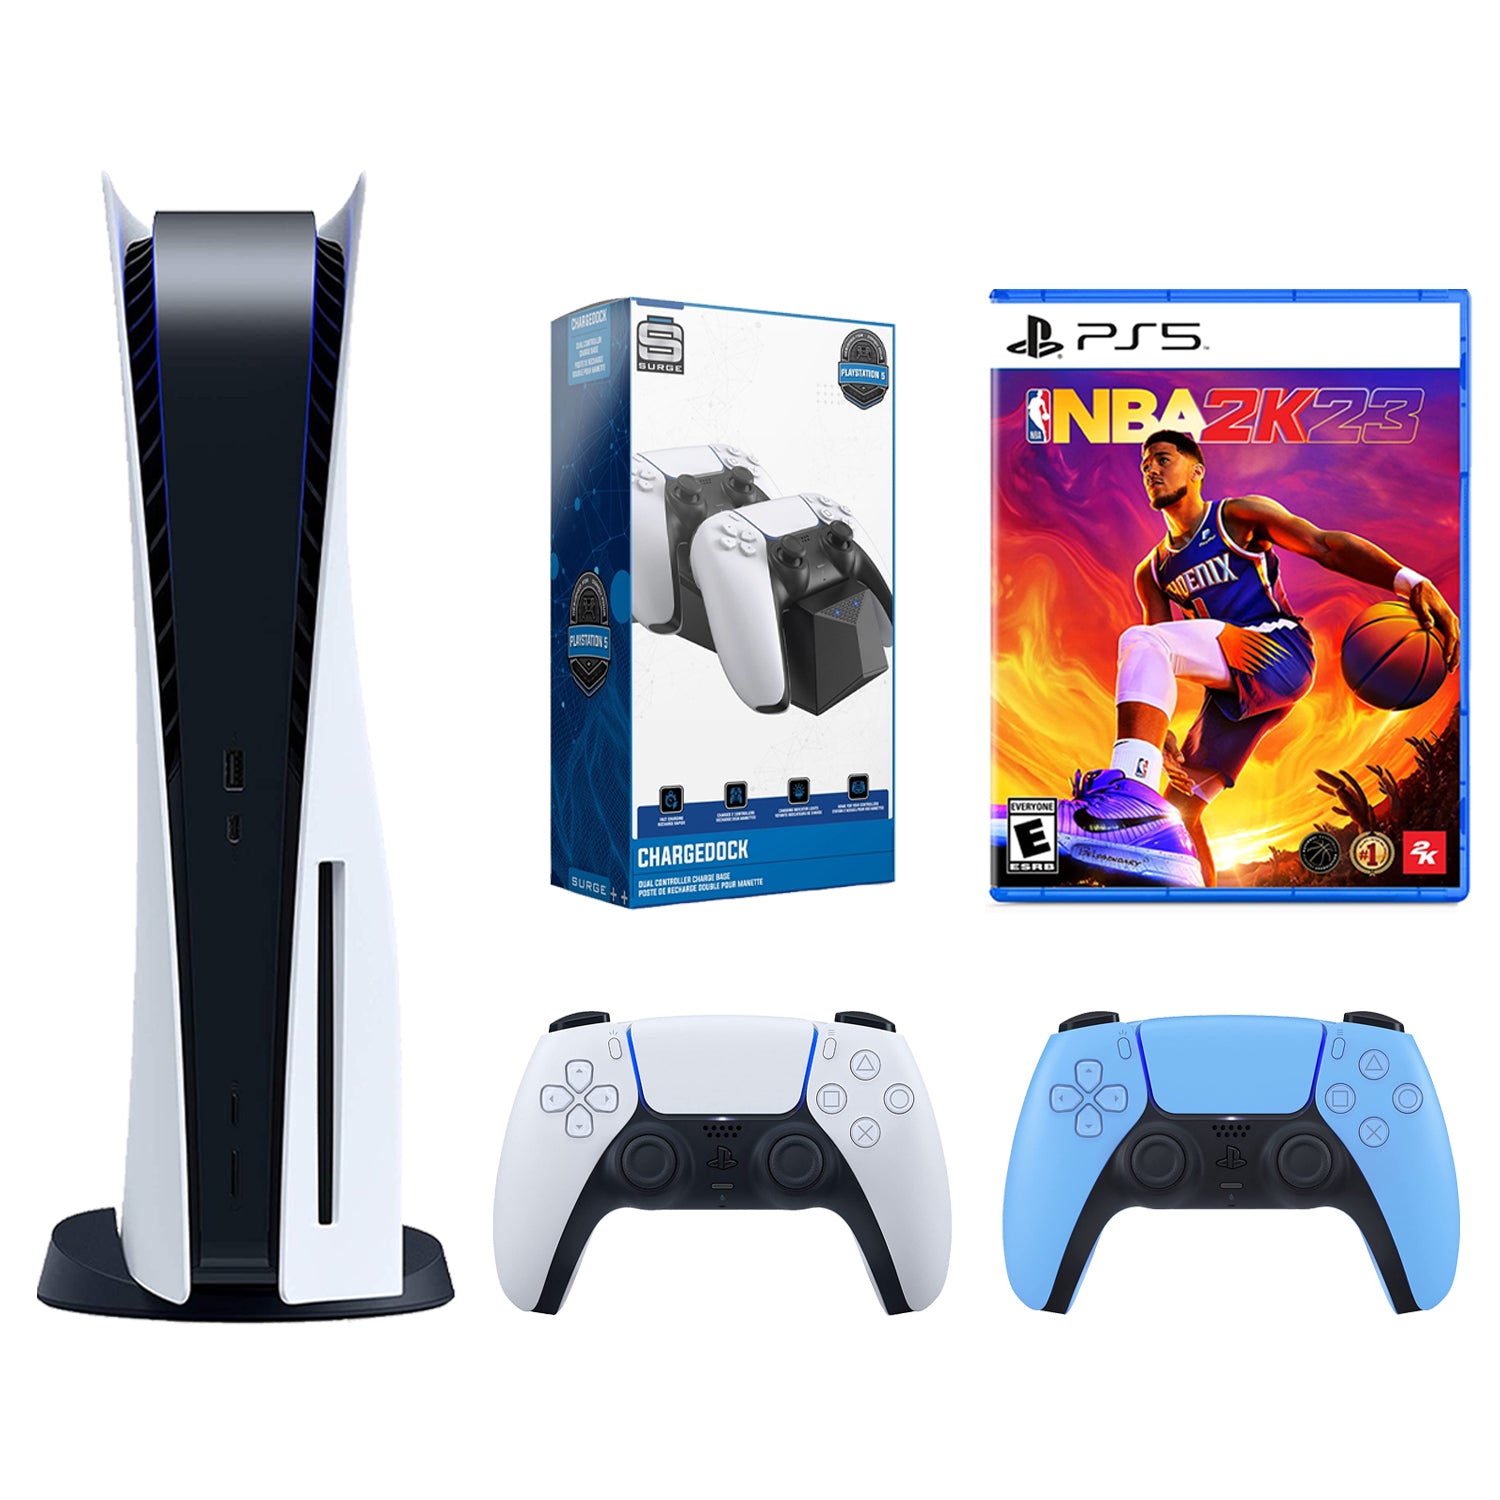 Sony Playstation 5 Disc with NBA 2K23, Extra Controller and Dual Charge Dock Bundle - Starlight Blue - Pro-Distributing